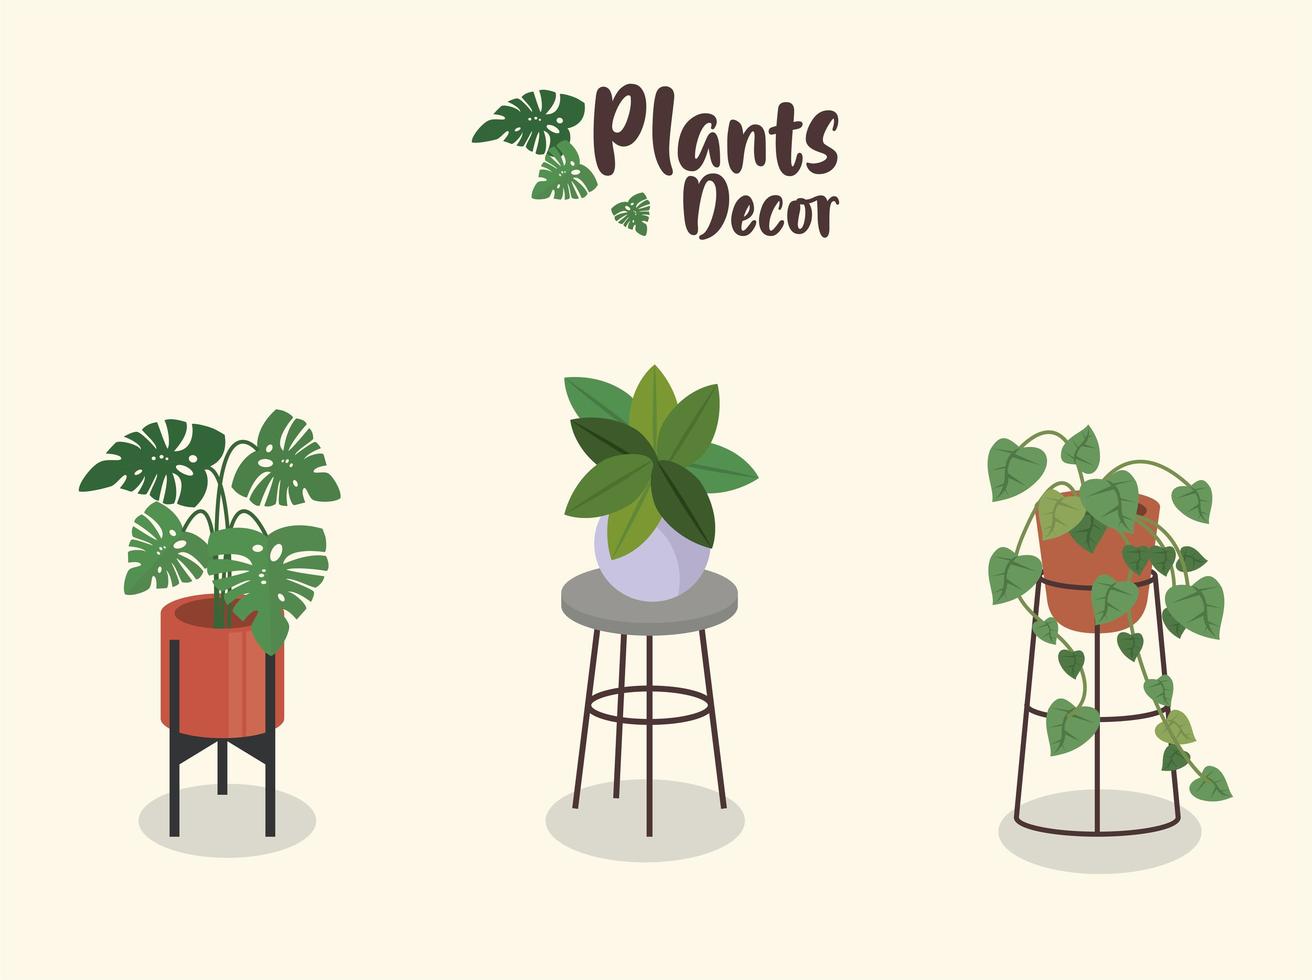 bundle of three home plants in ceramic pots decor and lettering vector